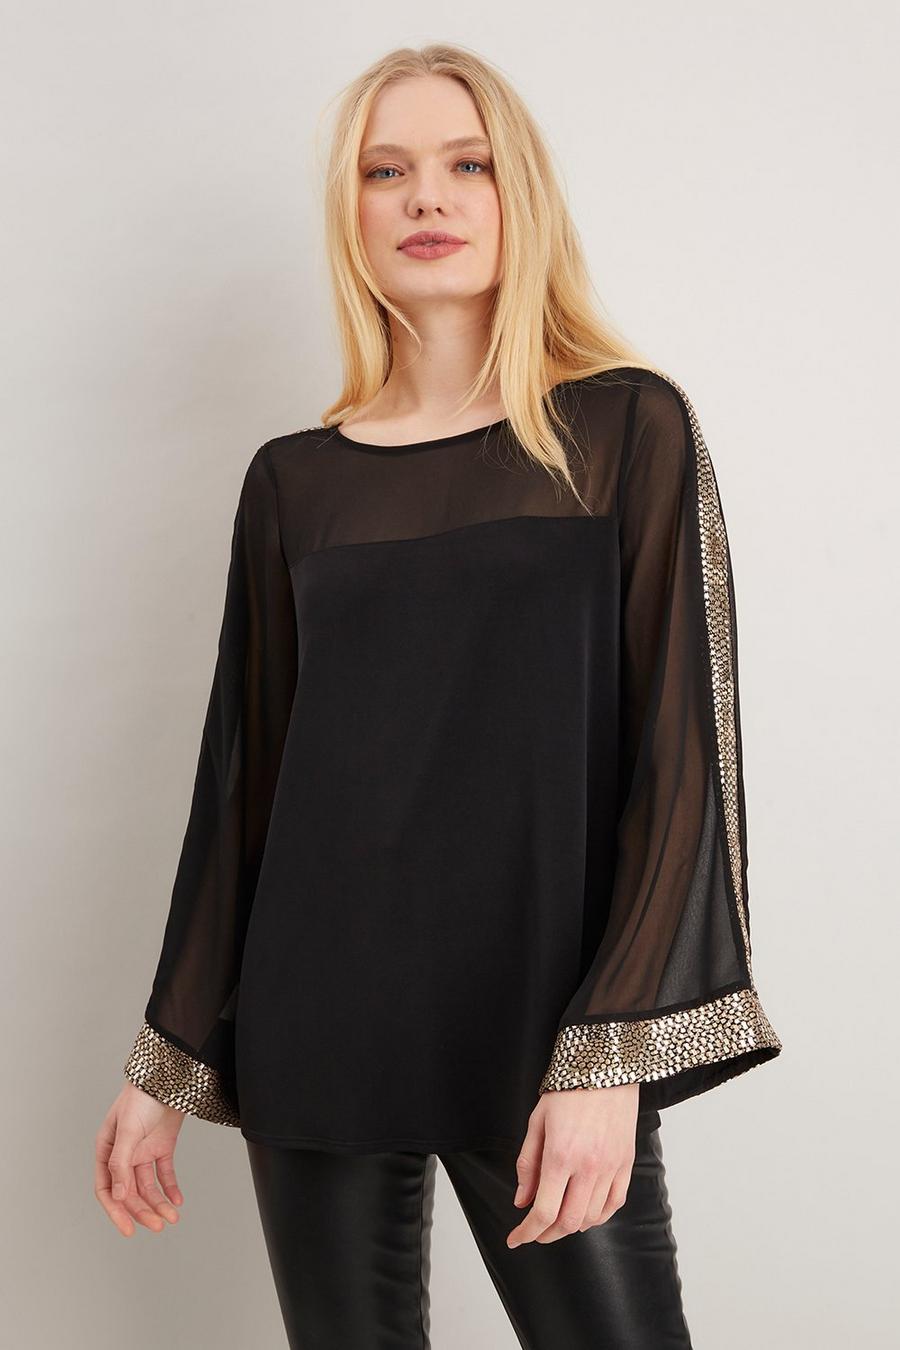 Gold Trim Chiffon Sleeve Party Top